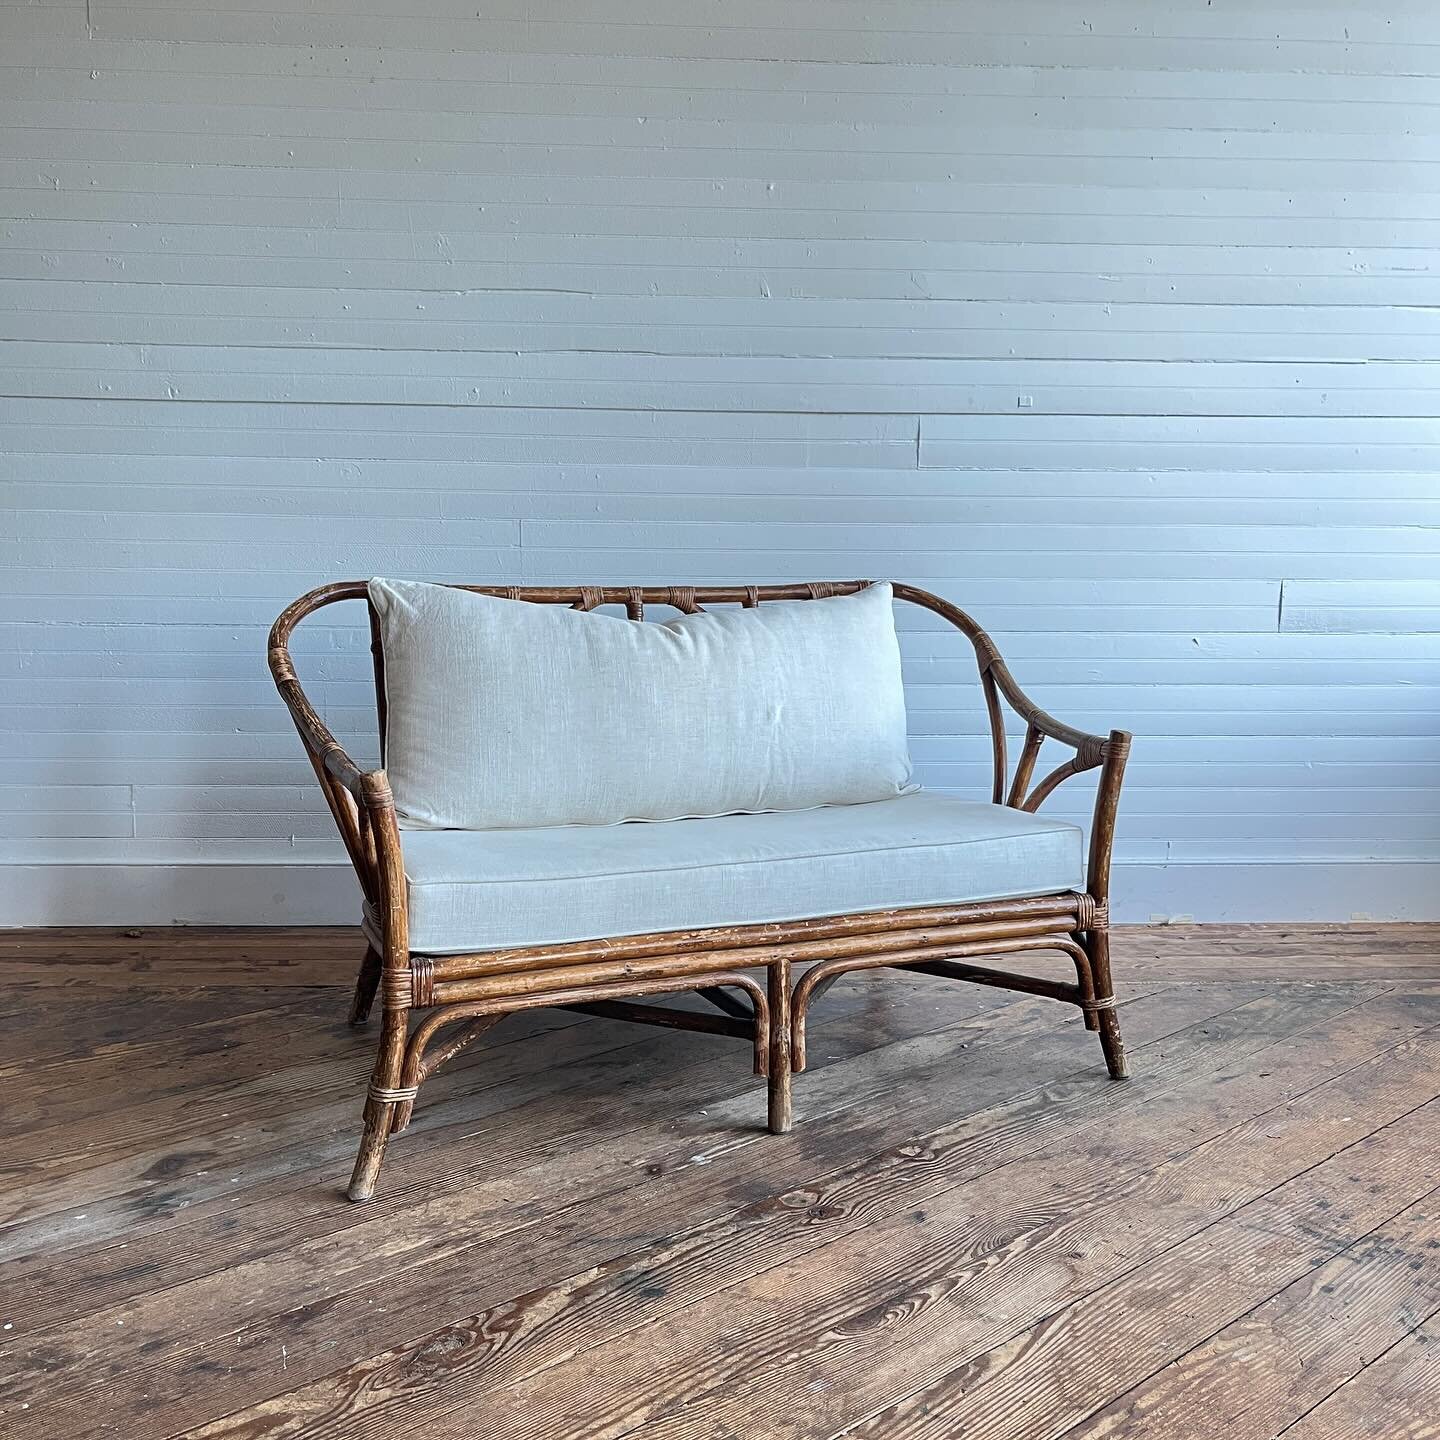 Vintage bamboo loveseat with linen upholstered pillows.  Good condition, wear to finish of frame.

30.5&rdquo;T x 51&rdquo;W x 27.5&rdquo;D

$395